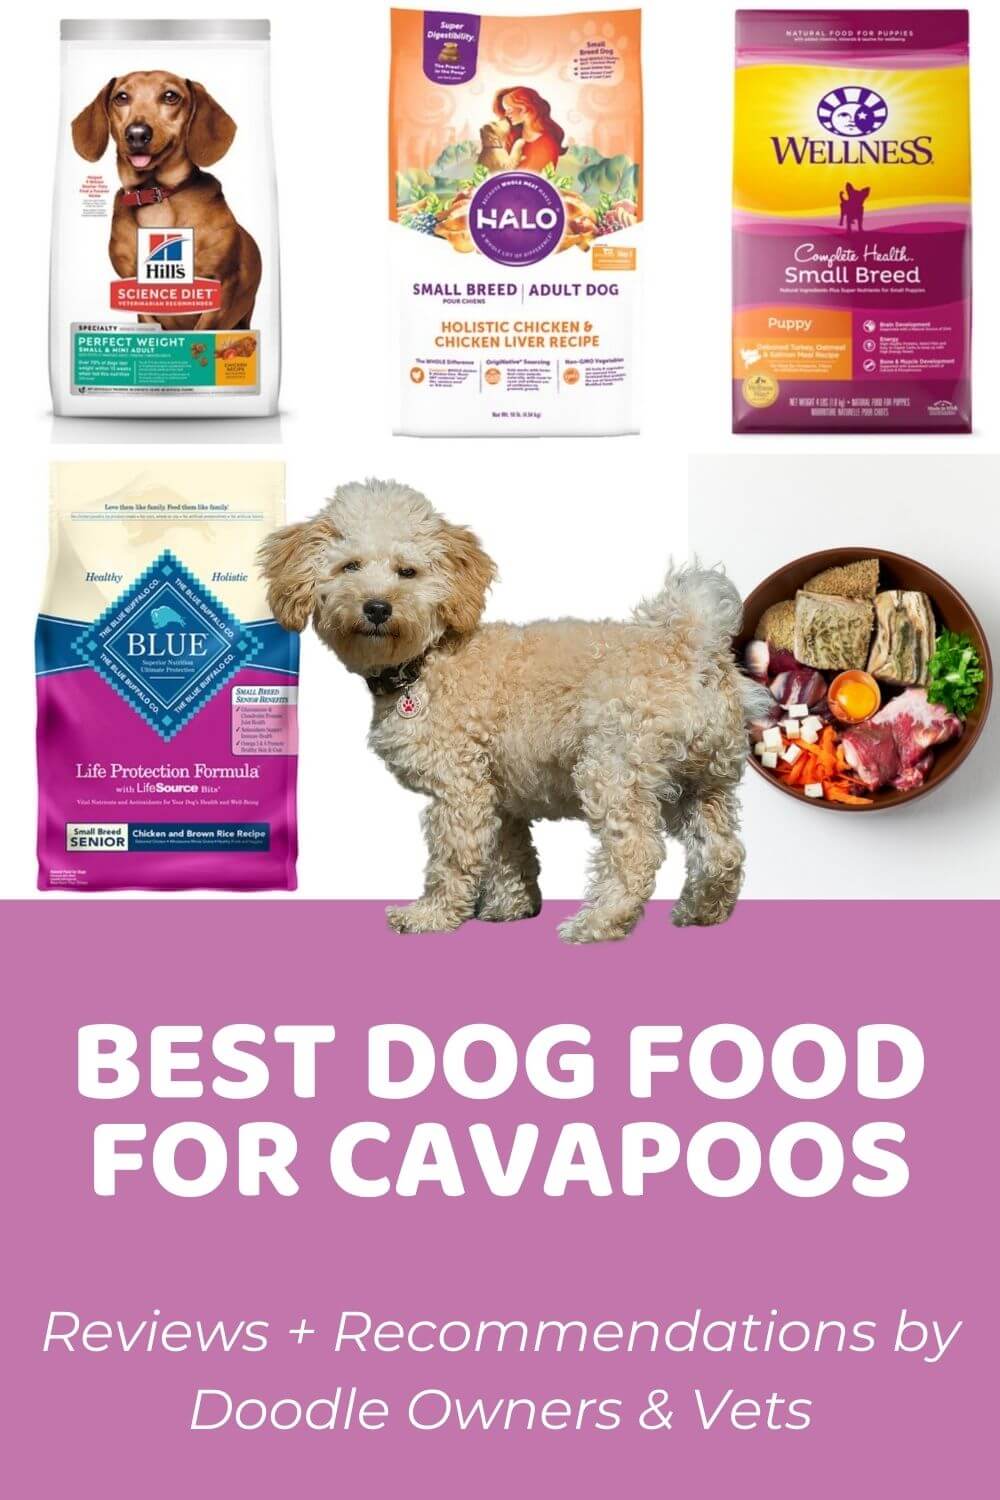 What is the Best Dog Food for Cavapoos?